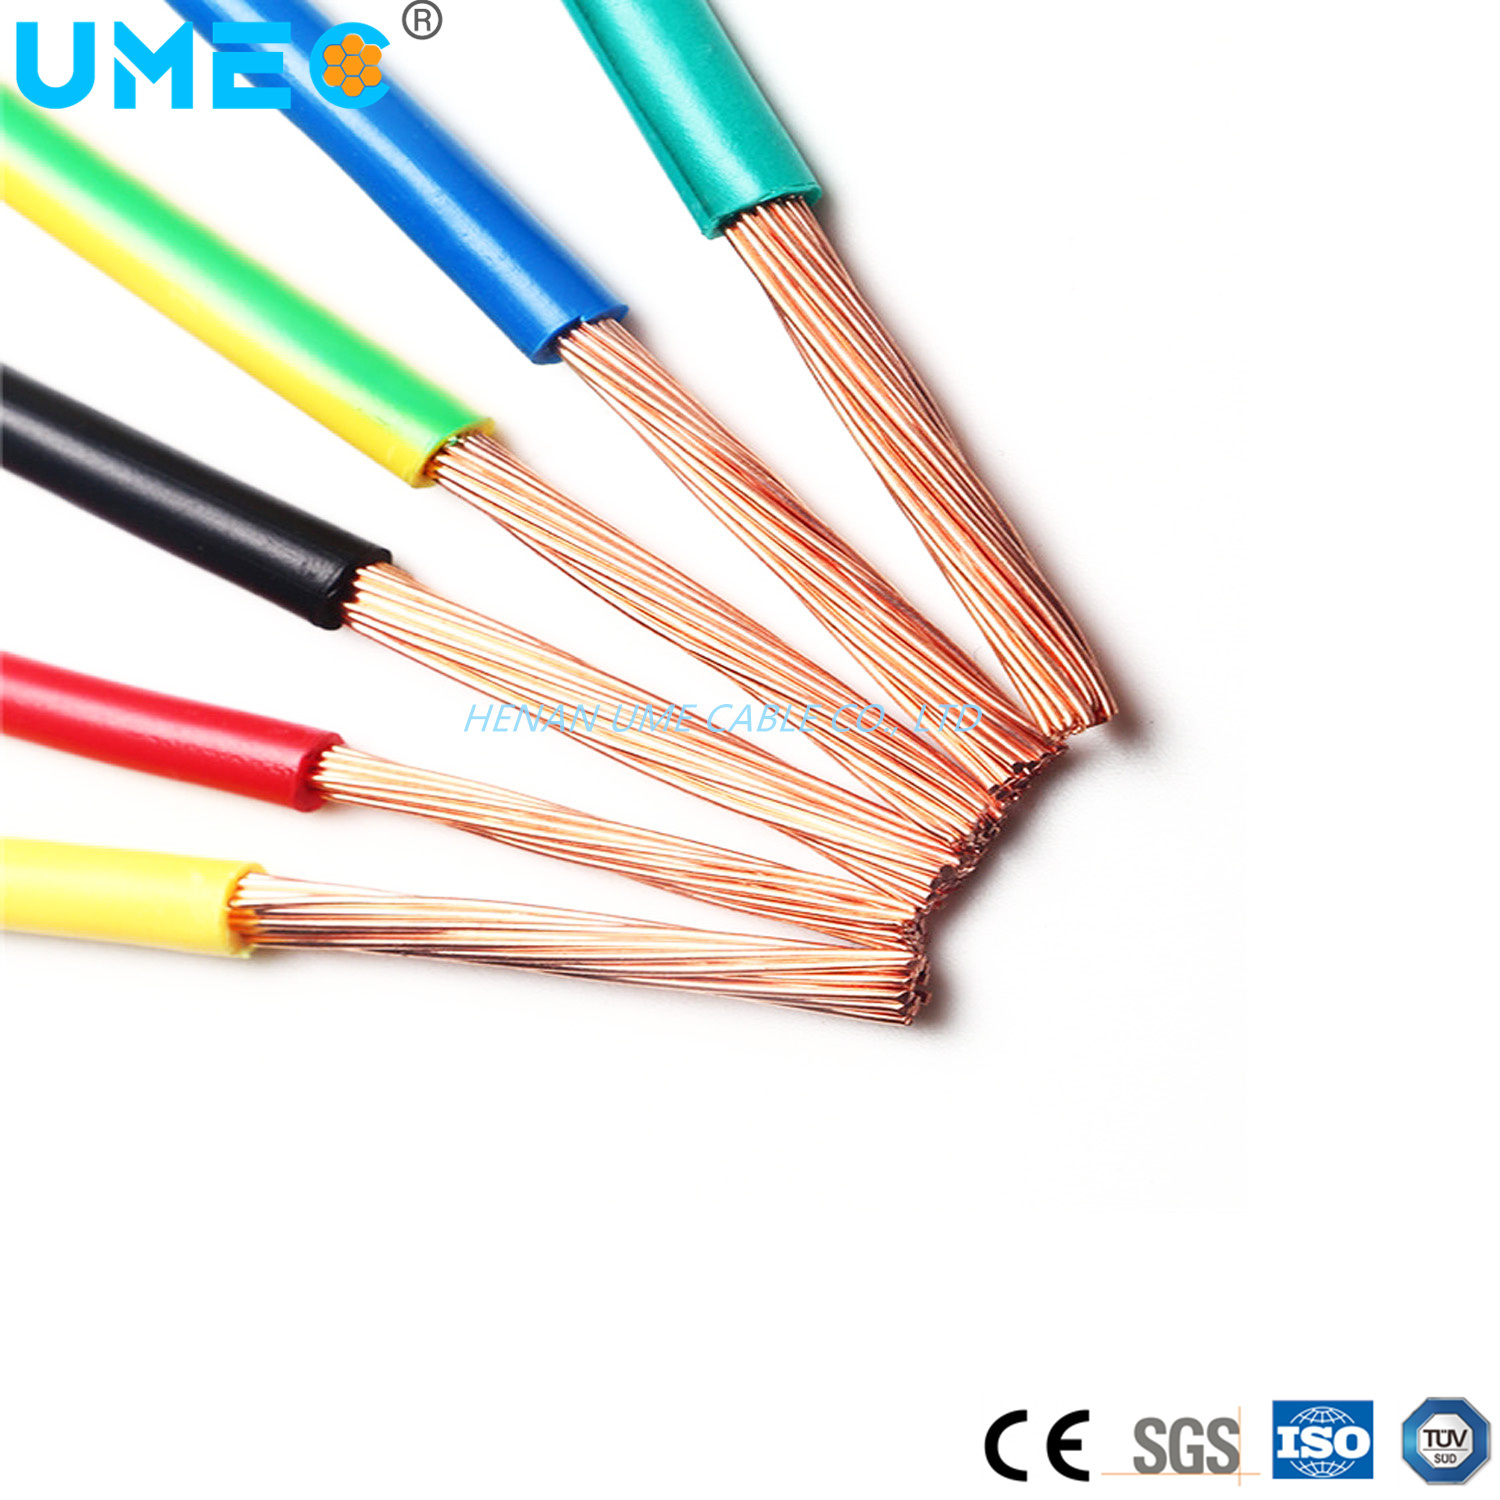 Oxygen Free Copper Conductor Multicore Core Wire PVC Insulated ASTM Standard AWG Electrique Wire Cable Bvr